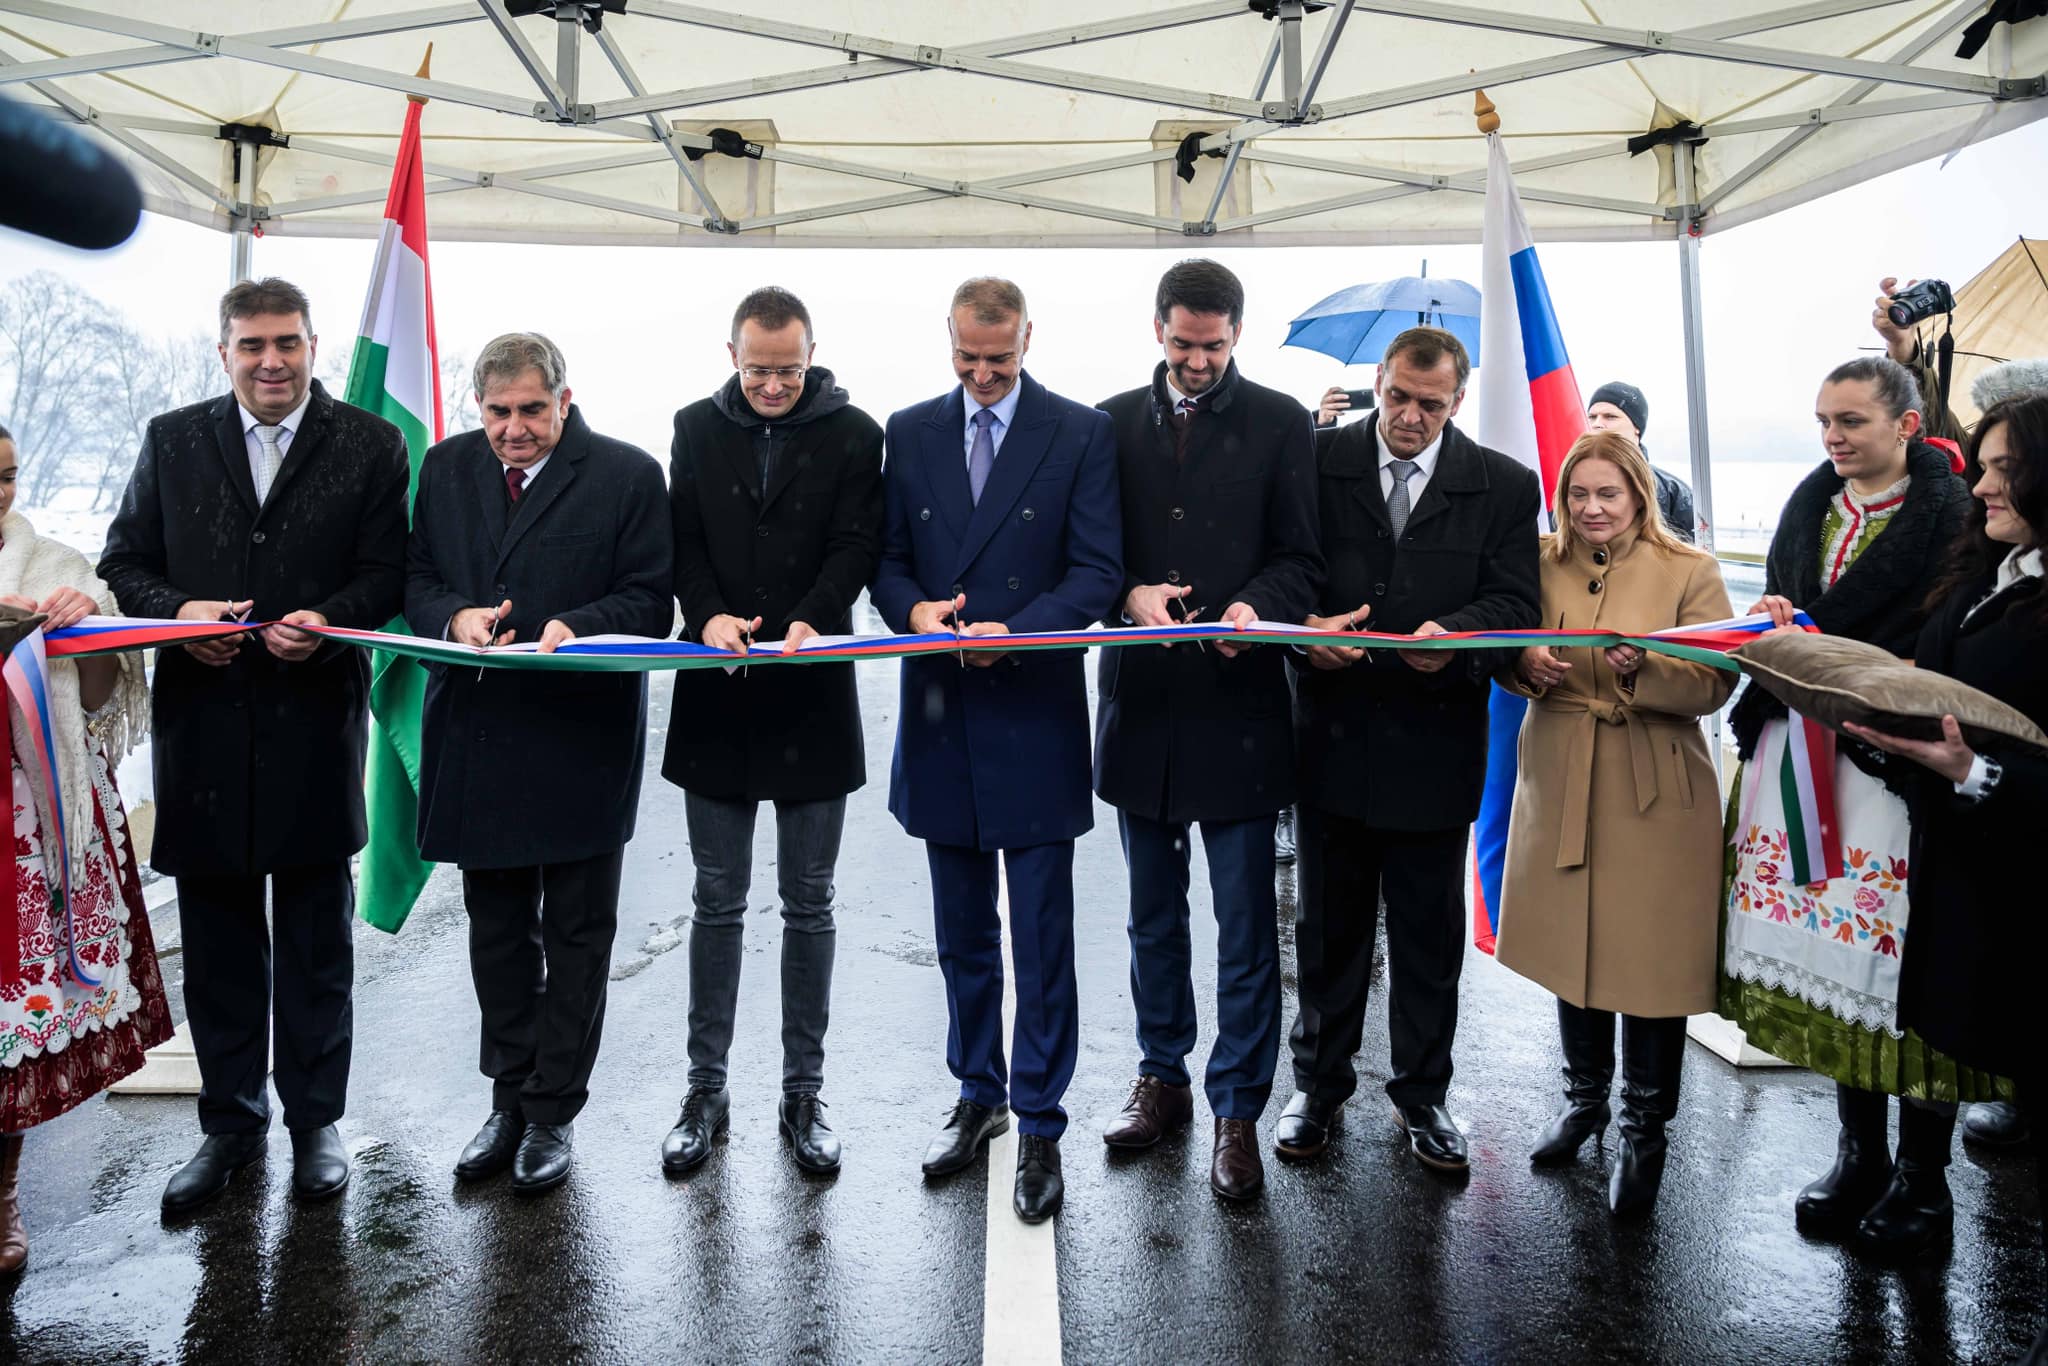 New Bridge Over River Ipoly Opened By Hungary And Slovakia